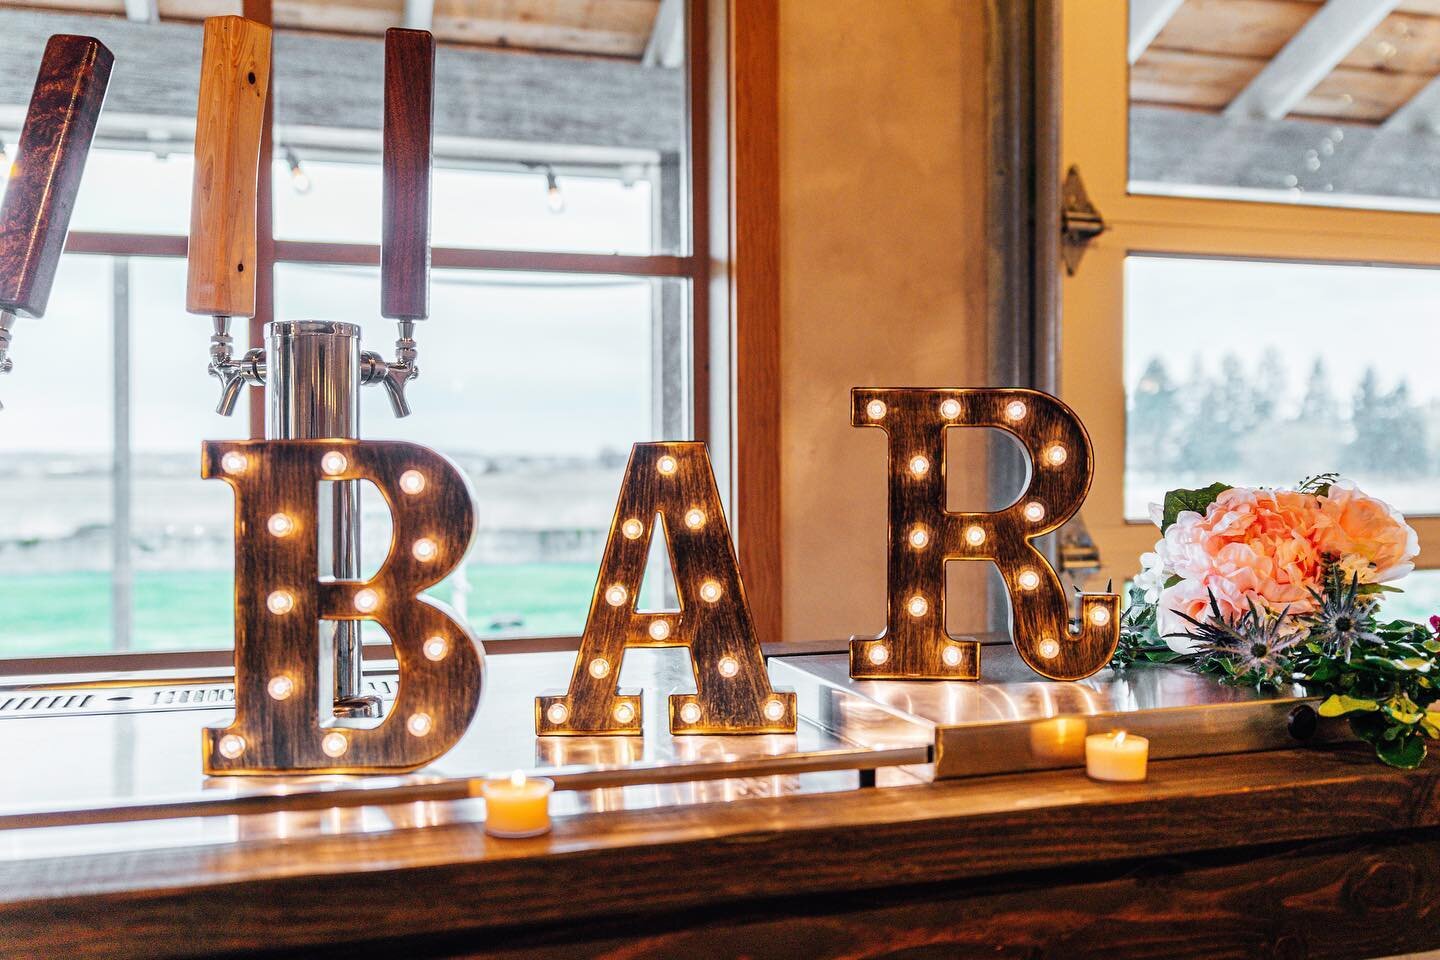 Looking forward to some icy cool beverages served up by the delightful duo @bigandsmallpours at this weekend&rsquo;s wedding!